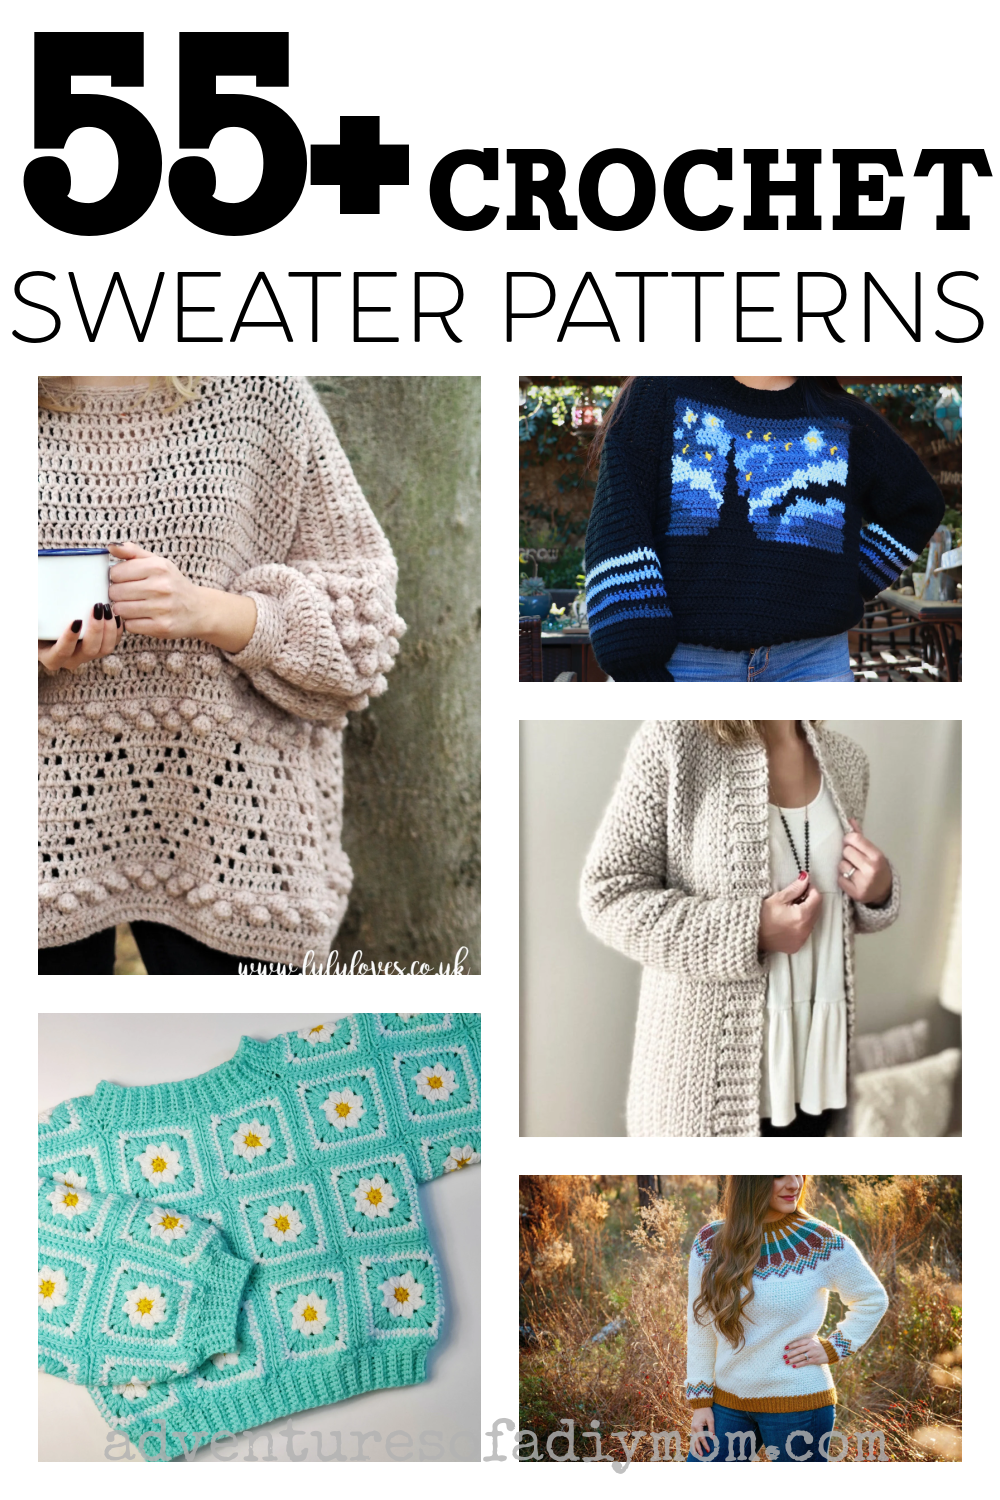 35 Free Crochet Patterns for Afghans - Cream Of The Crop Crochet